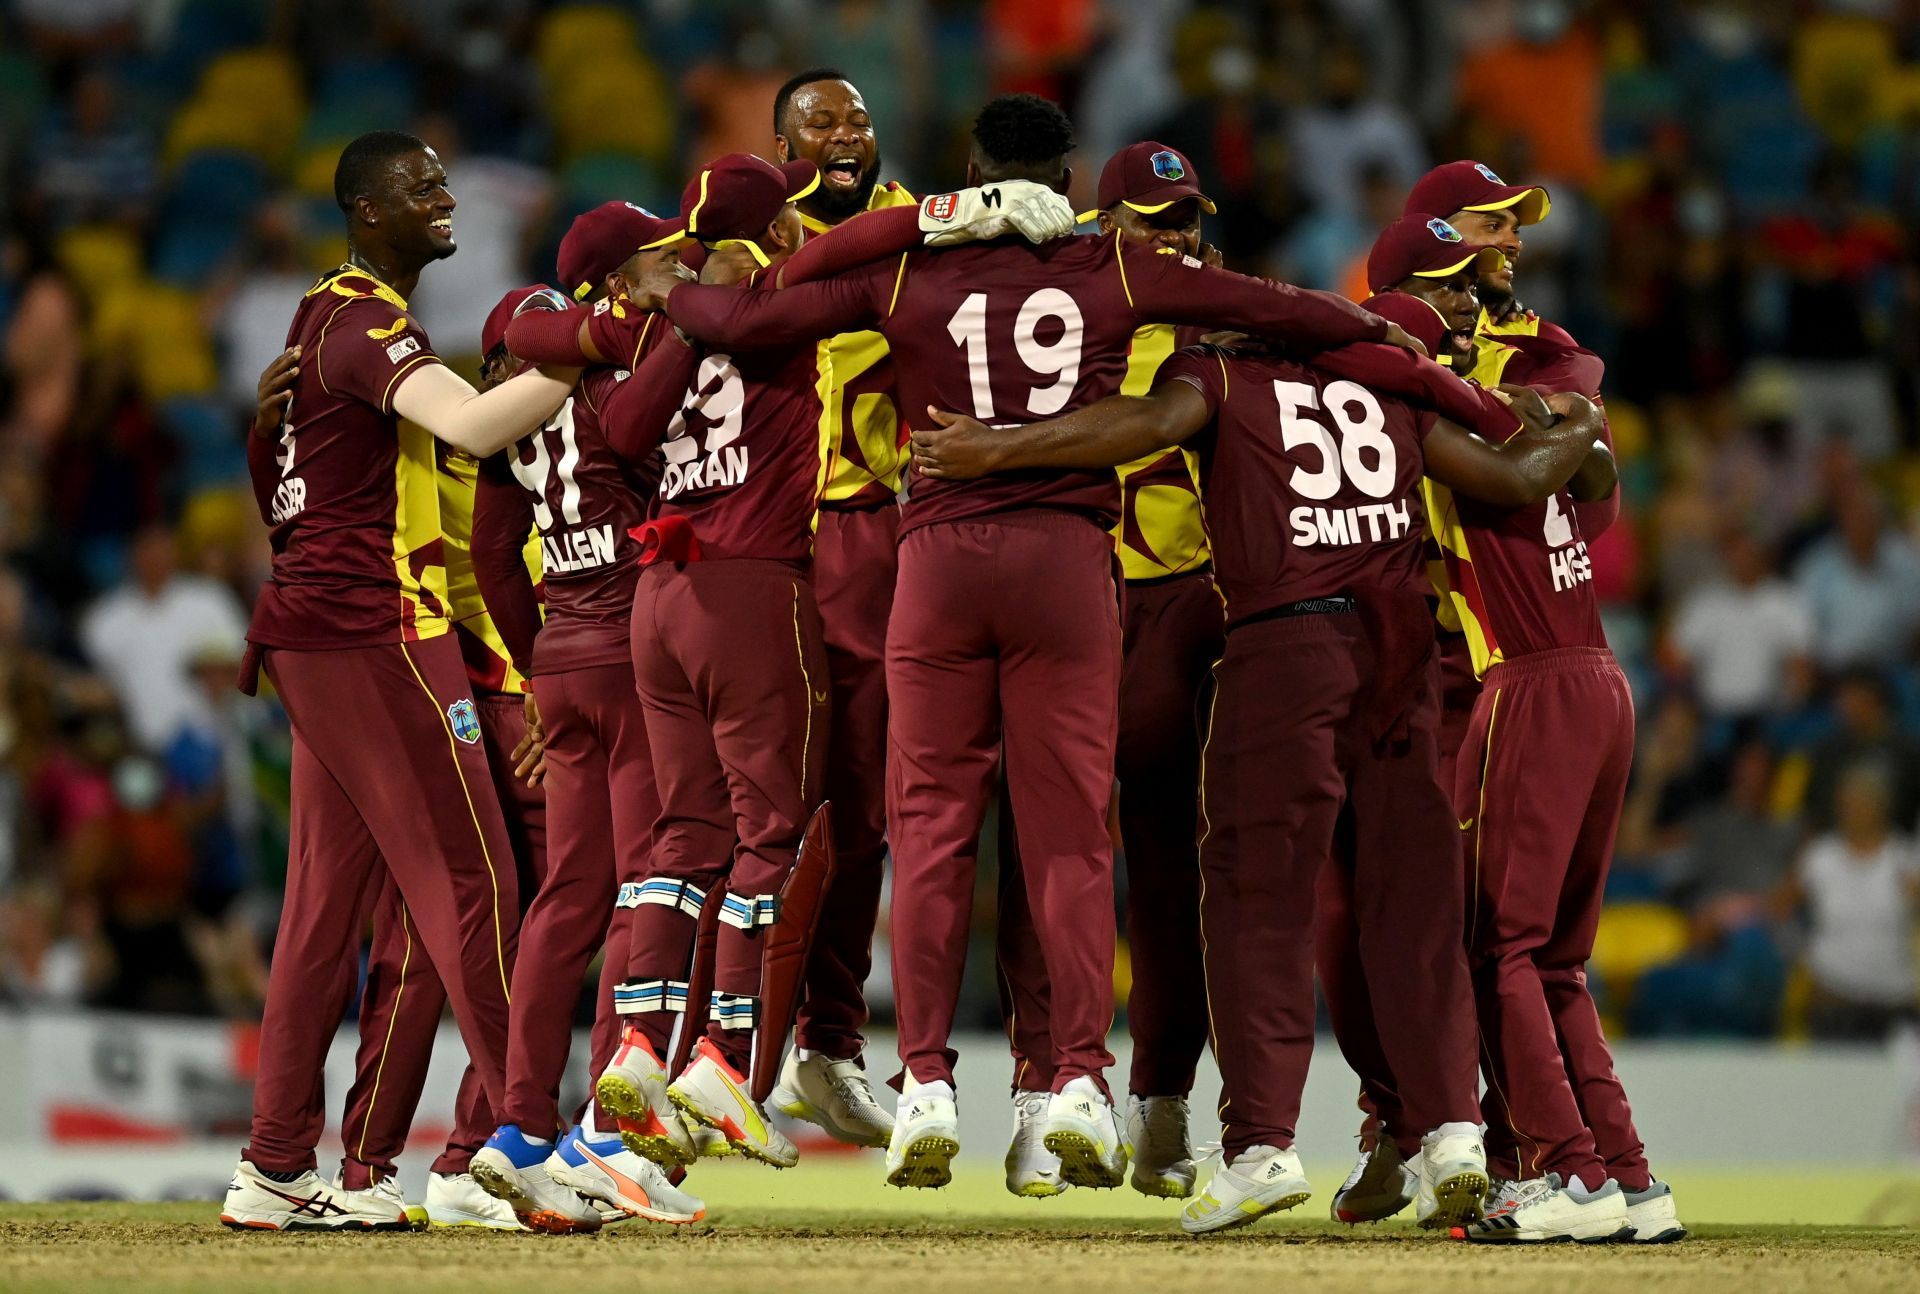 West Indies to tour the Netherlands for an ODI series this summer.